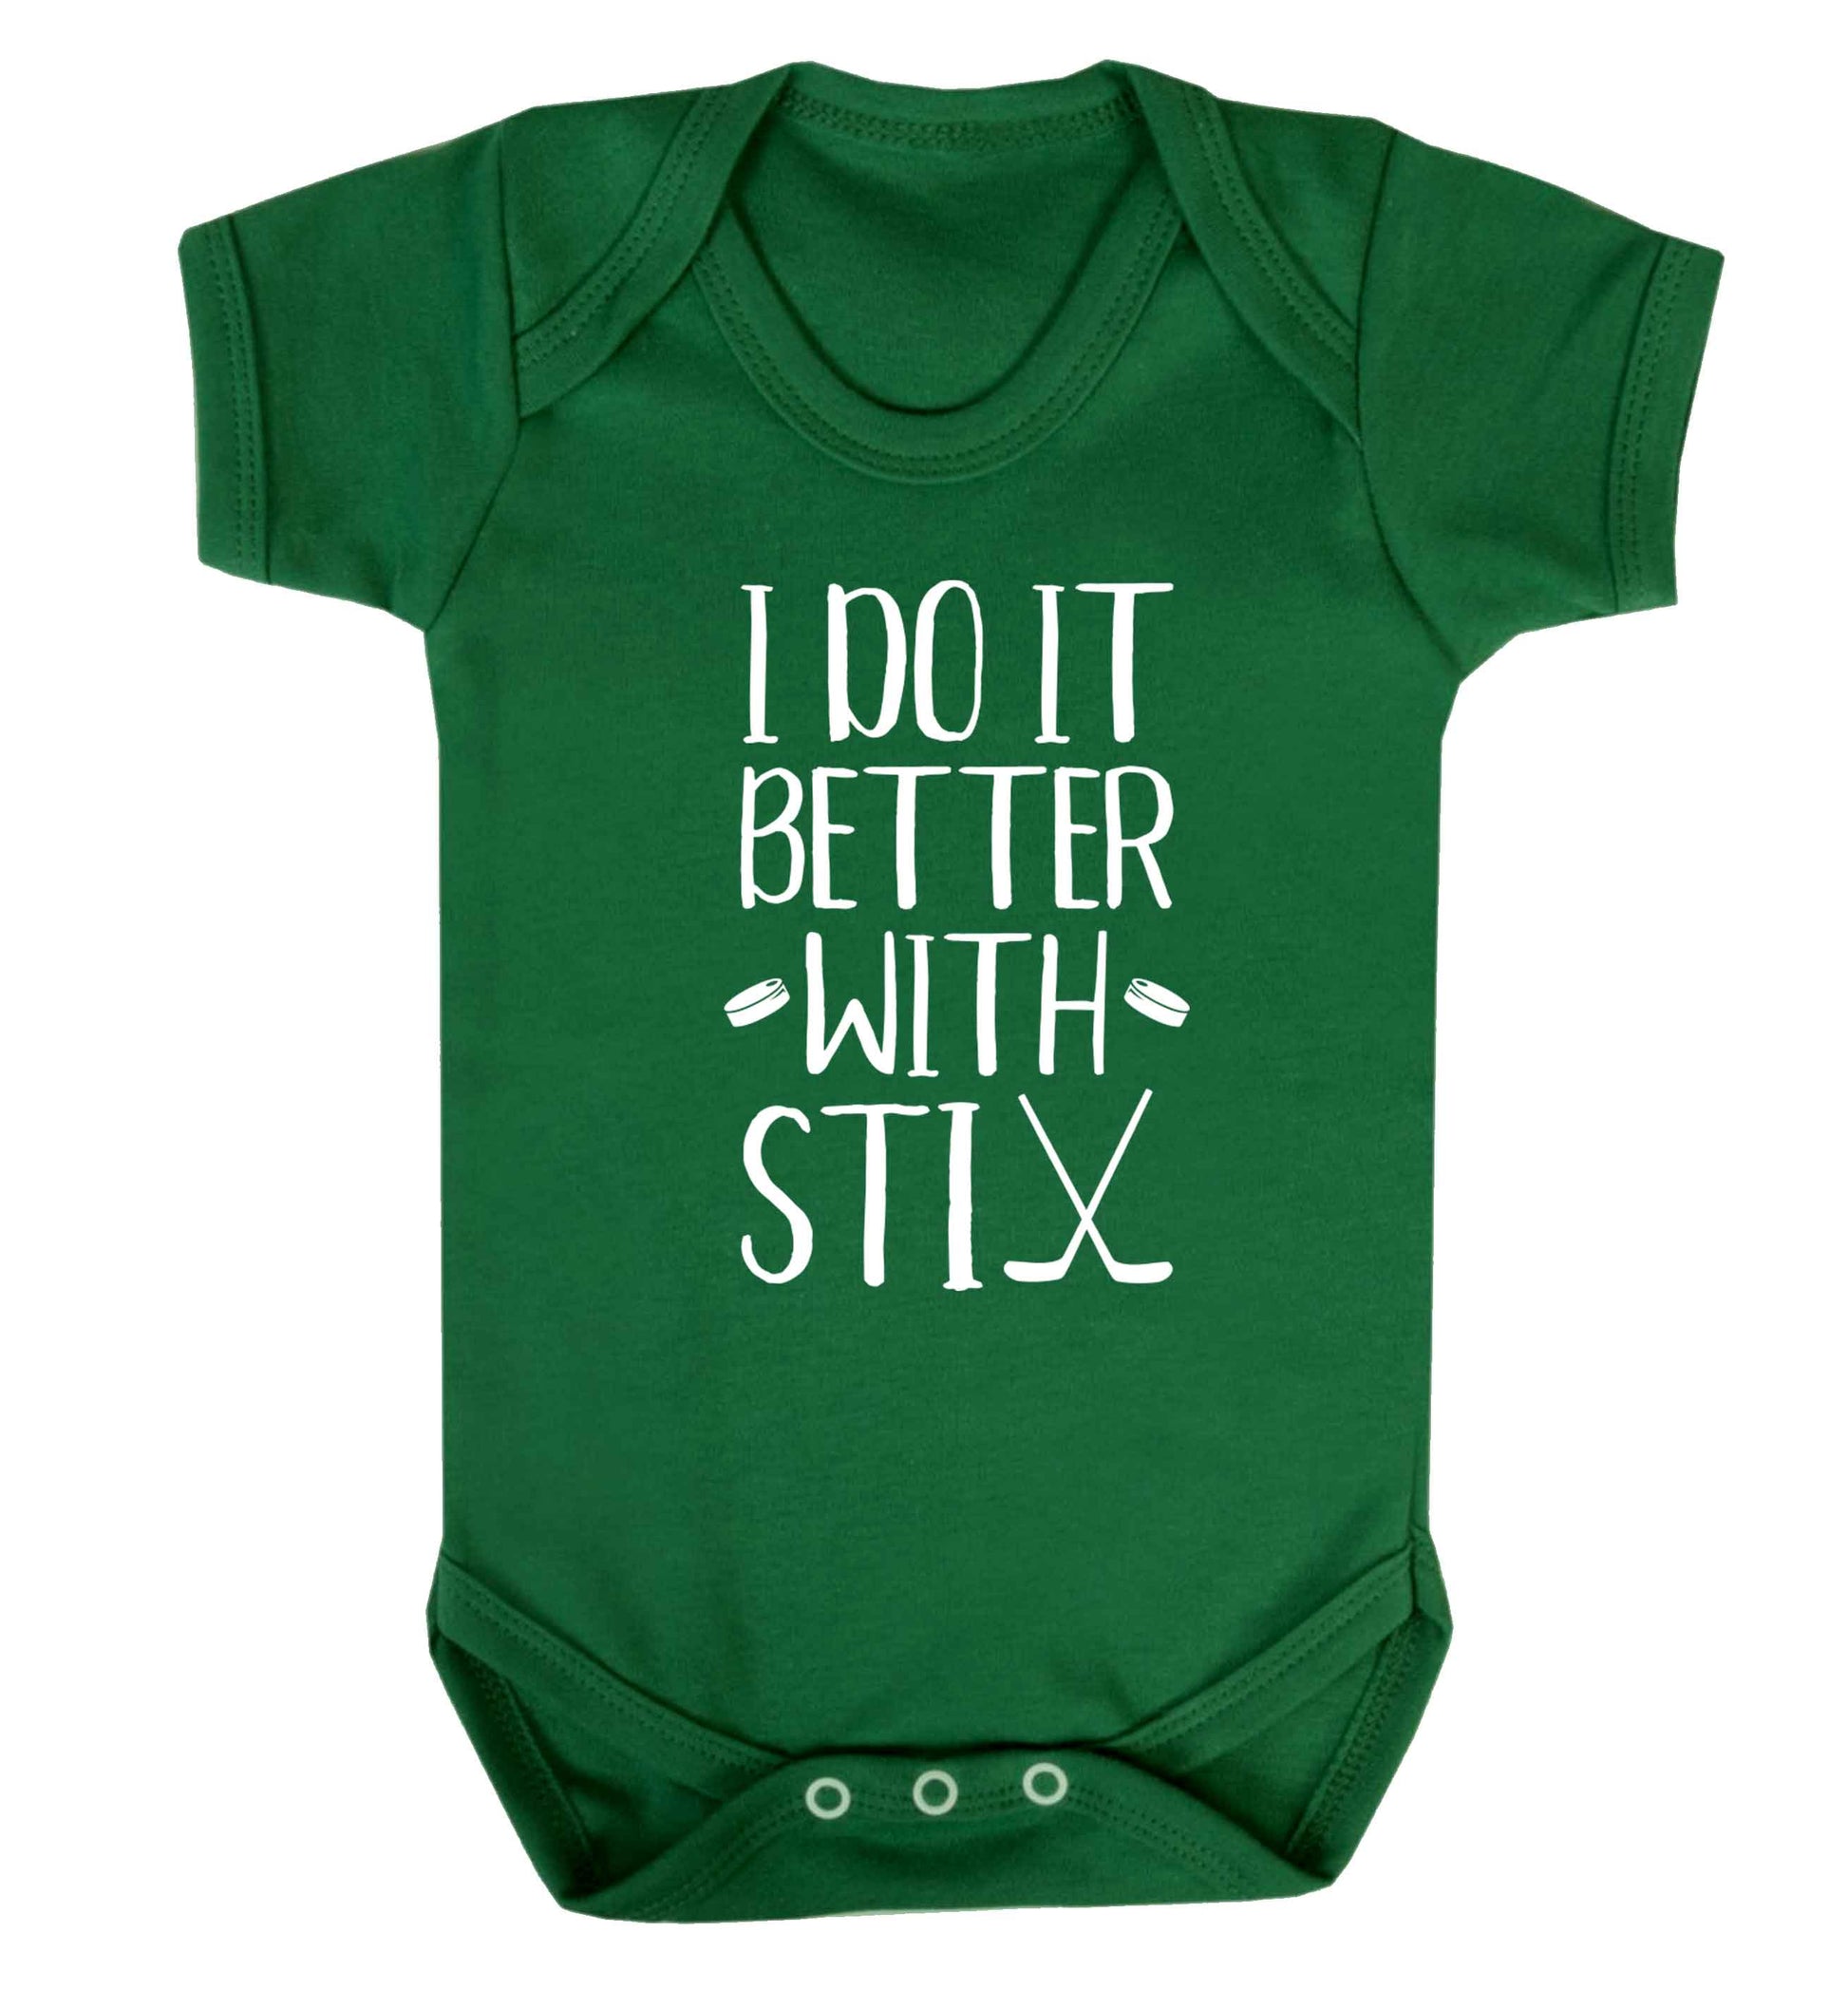 I do it better with stix (hockey) Baby Vest green 18-24 months